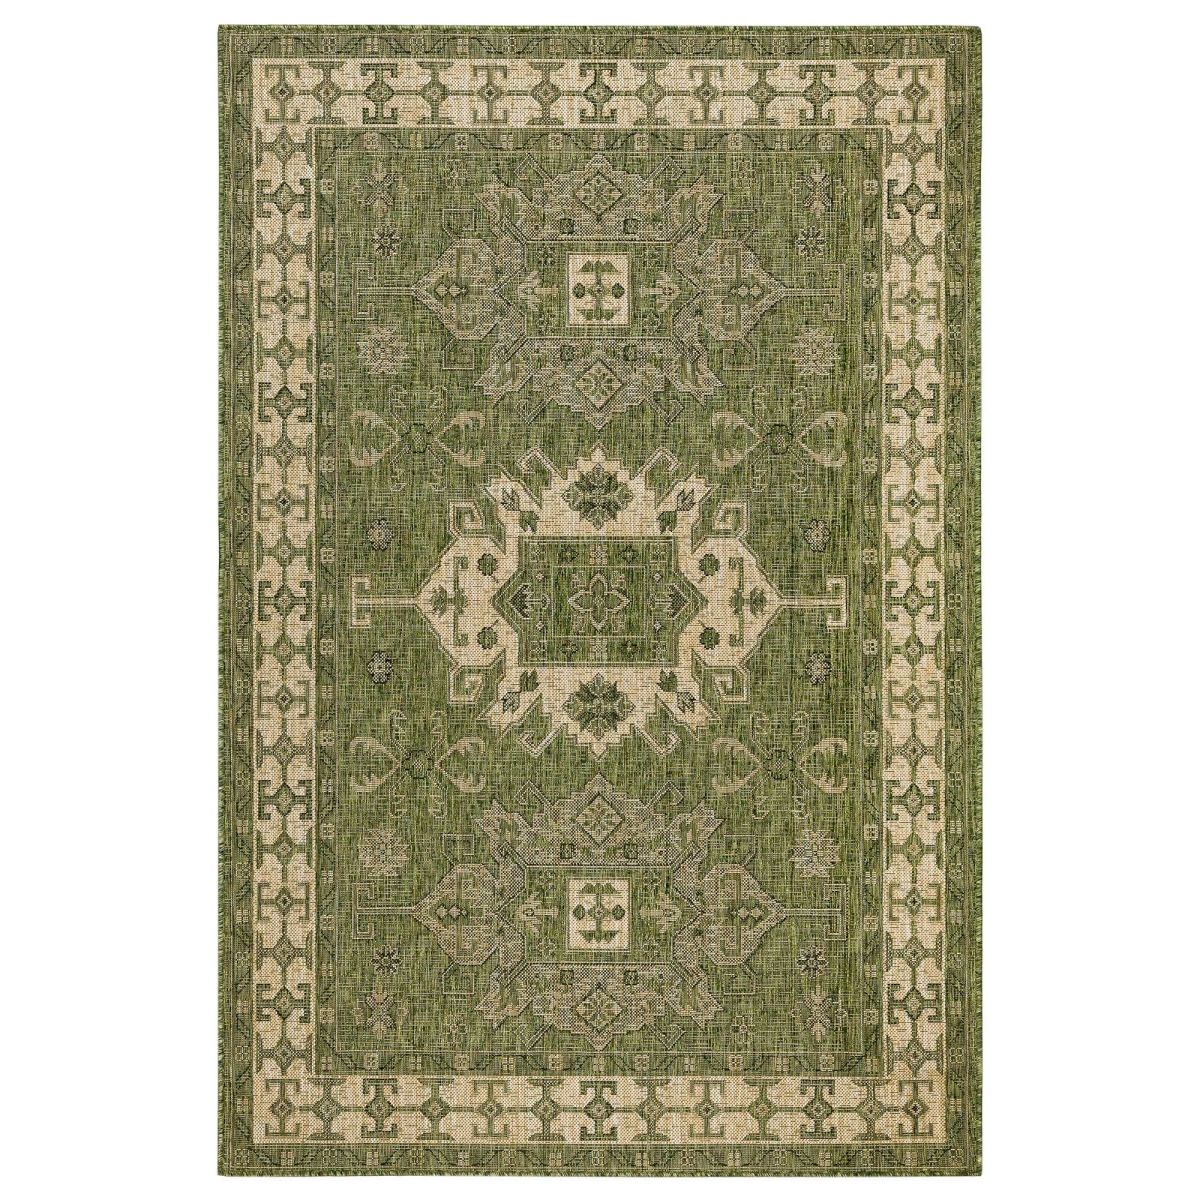 Trans-ocean Imports Cre45840906 39 X 59 In. Liora Manne Carmel Kilim Indoor & Outdoor Rug - Green